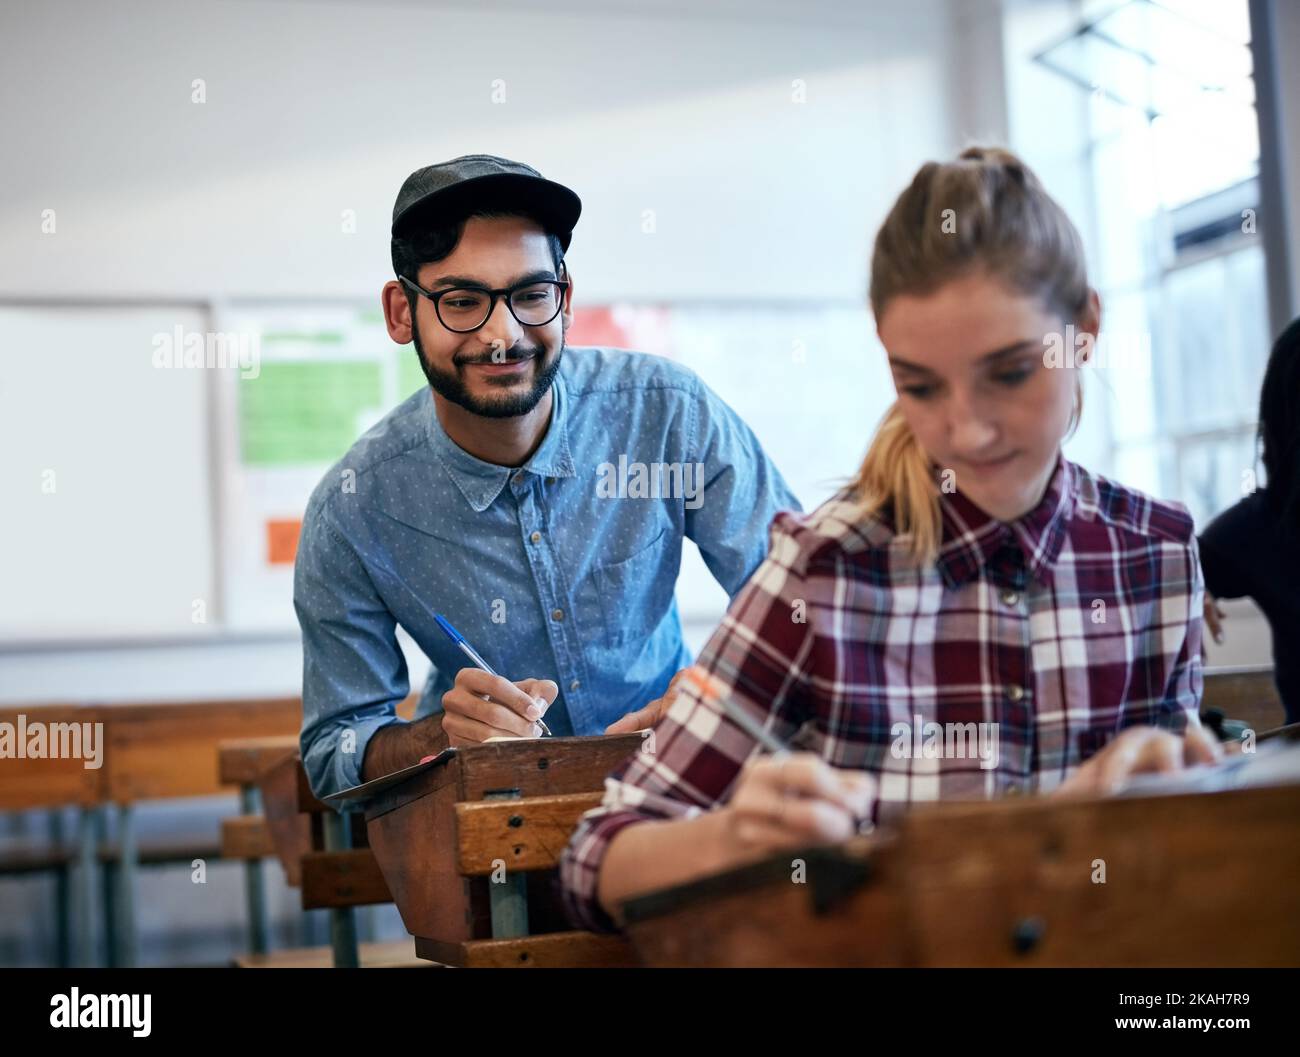 Cheating is never okay. an university student trying to cheat in class. Stock Photo